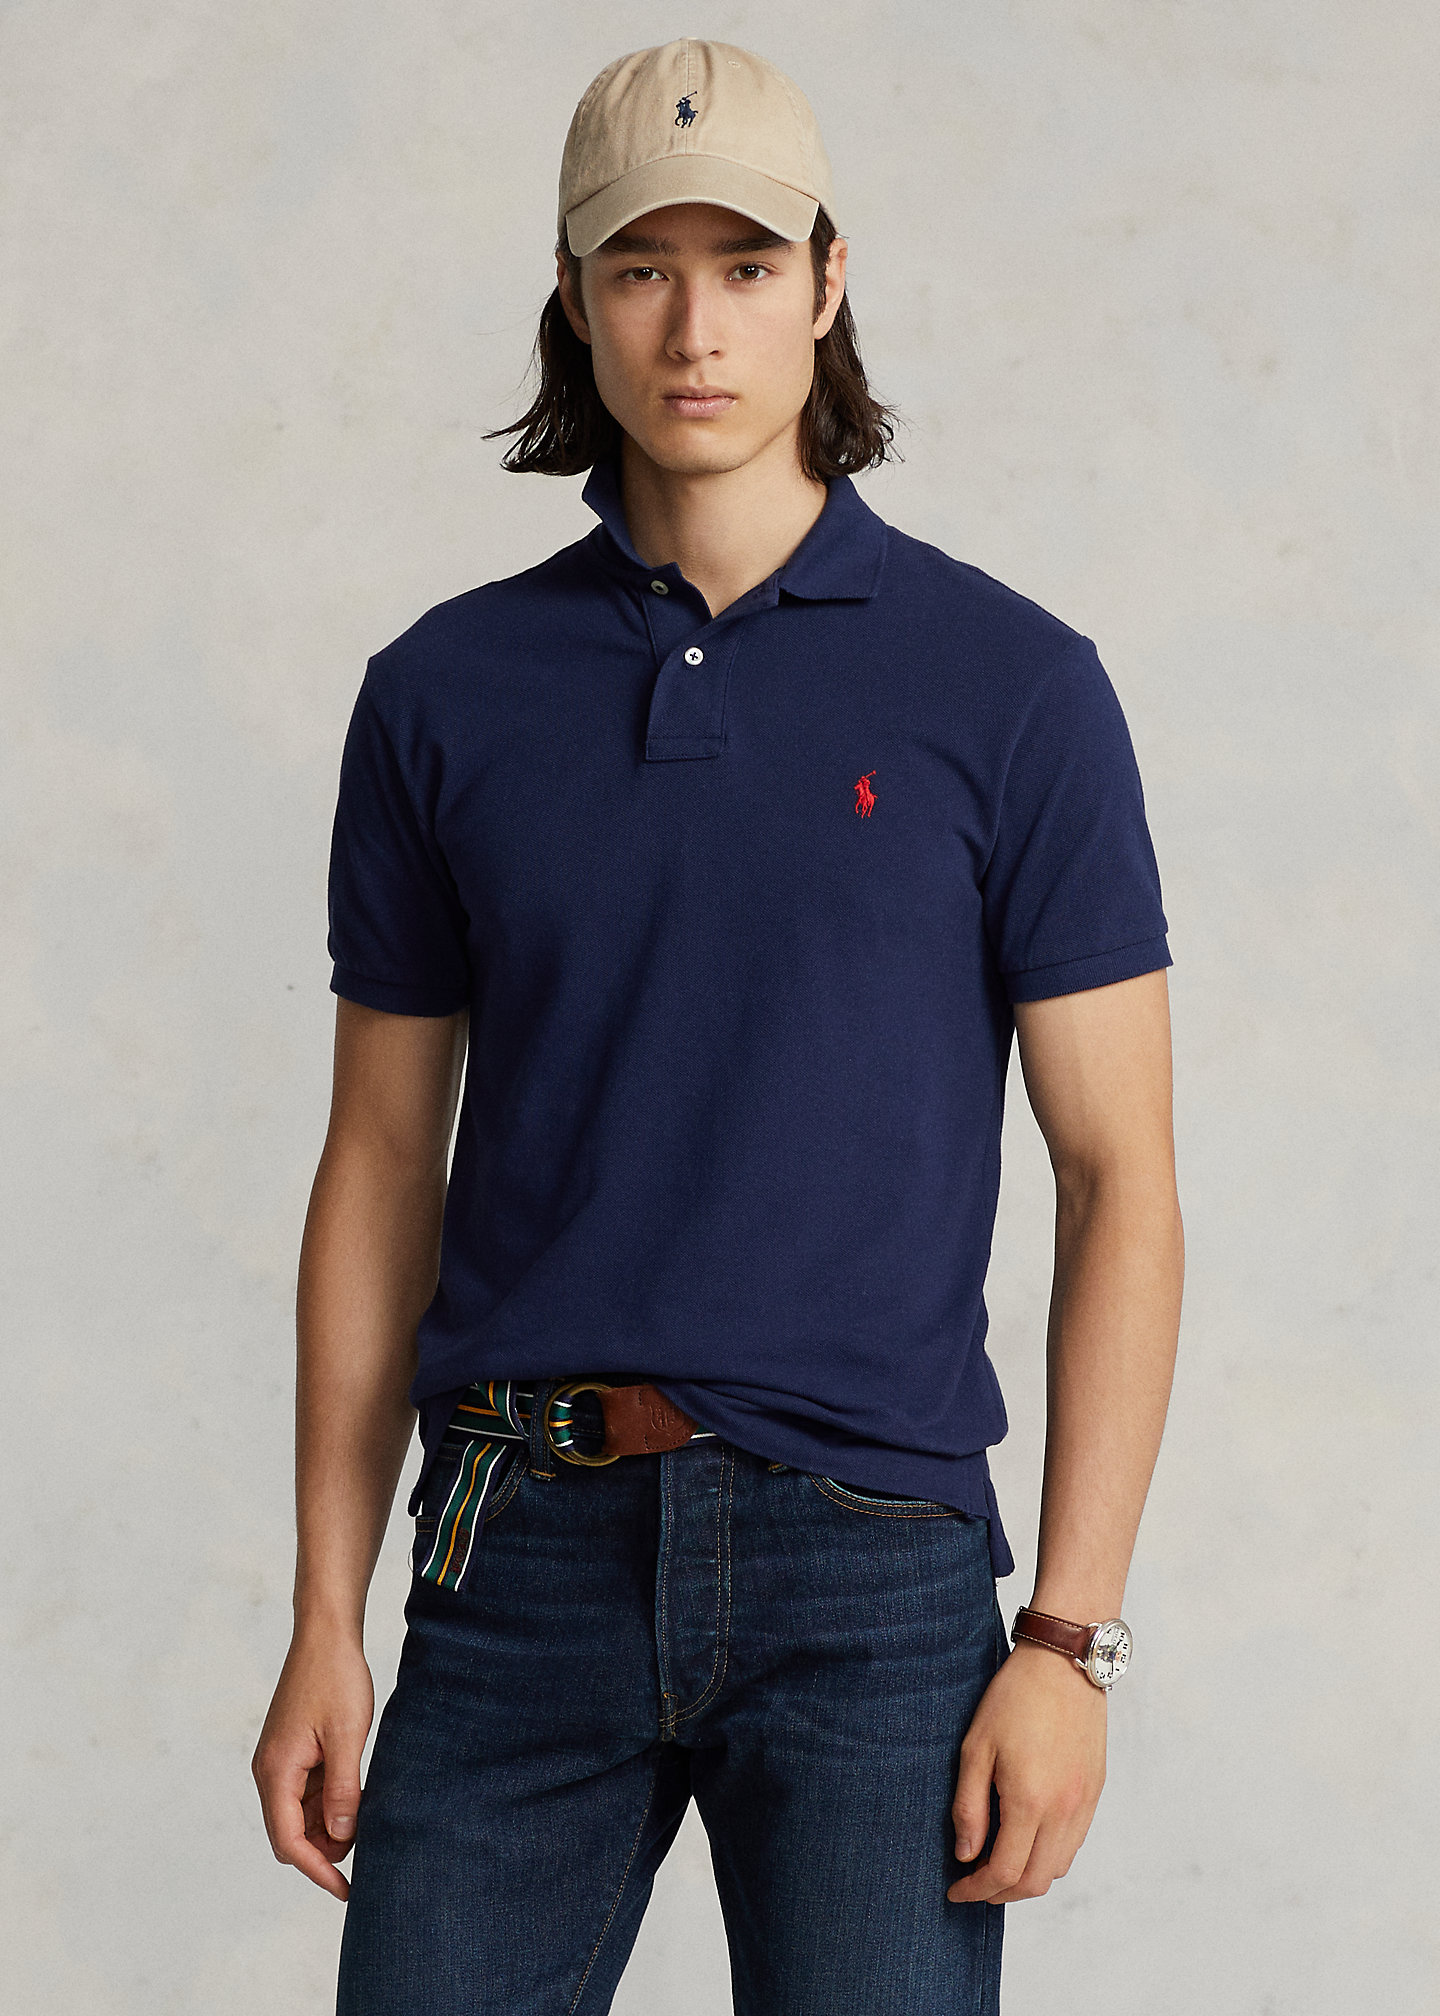 Polo Ralph Lauren The Iconic Mesh Polo Shirt - All Fits 1